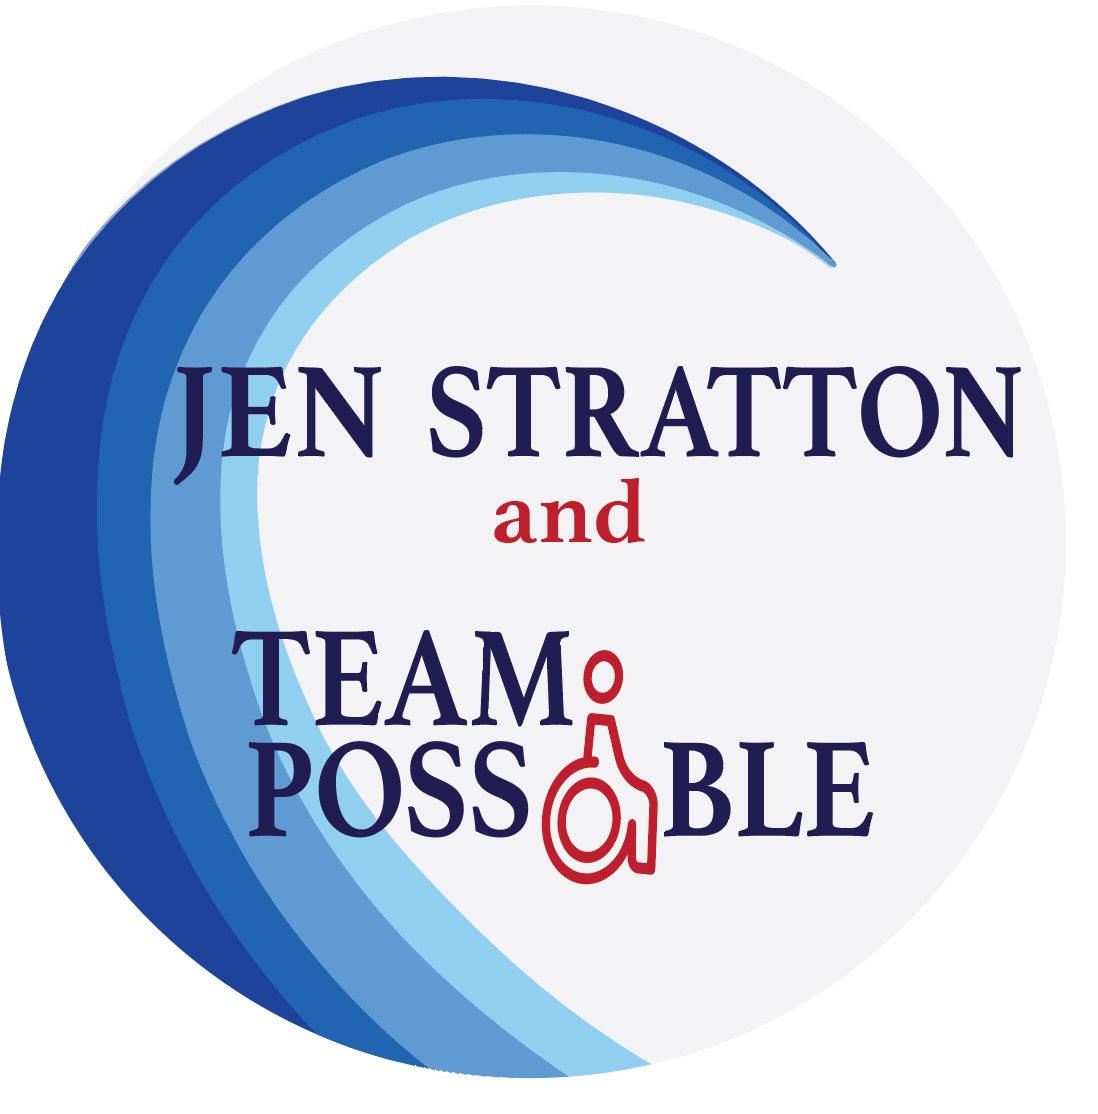 Jen stratton and team possible logo